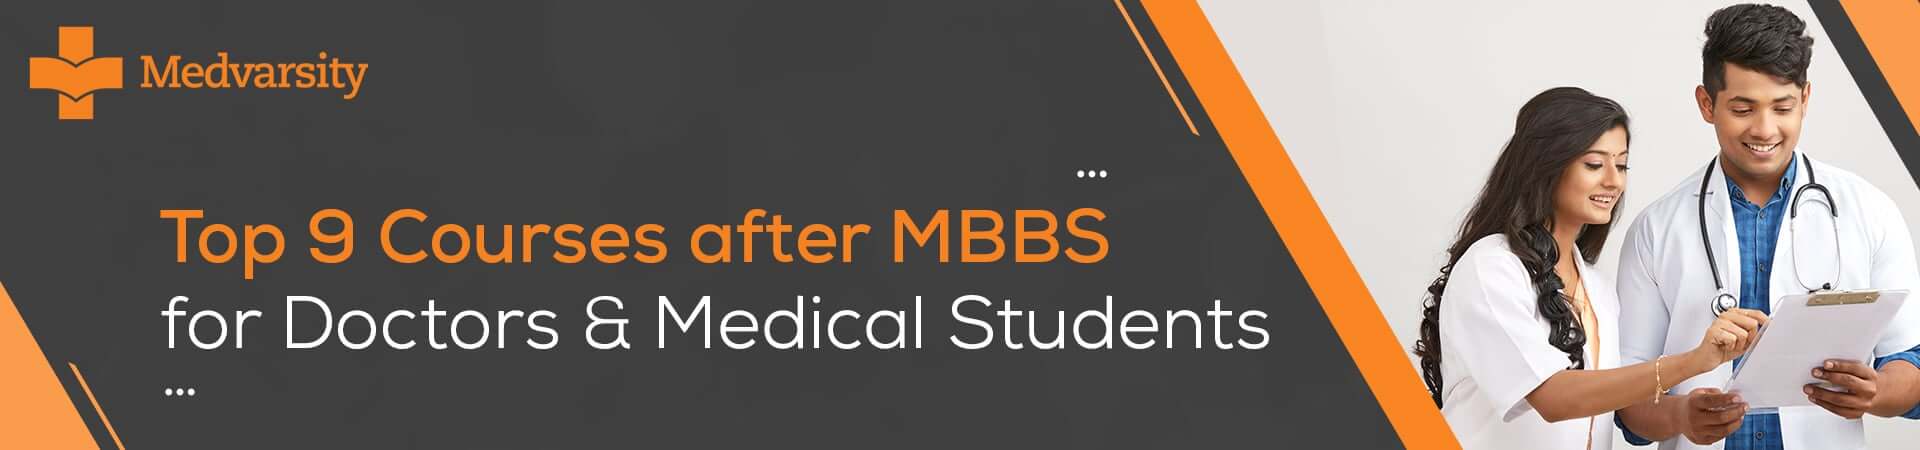 A female and a male doctor are engaged in a discussion about available fellowship courses after MBBS, exploring opportunities for career growth.